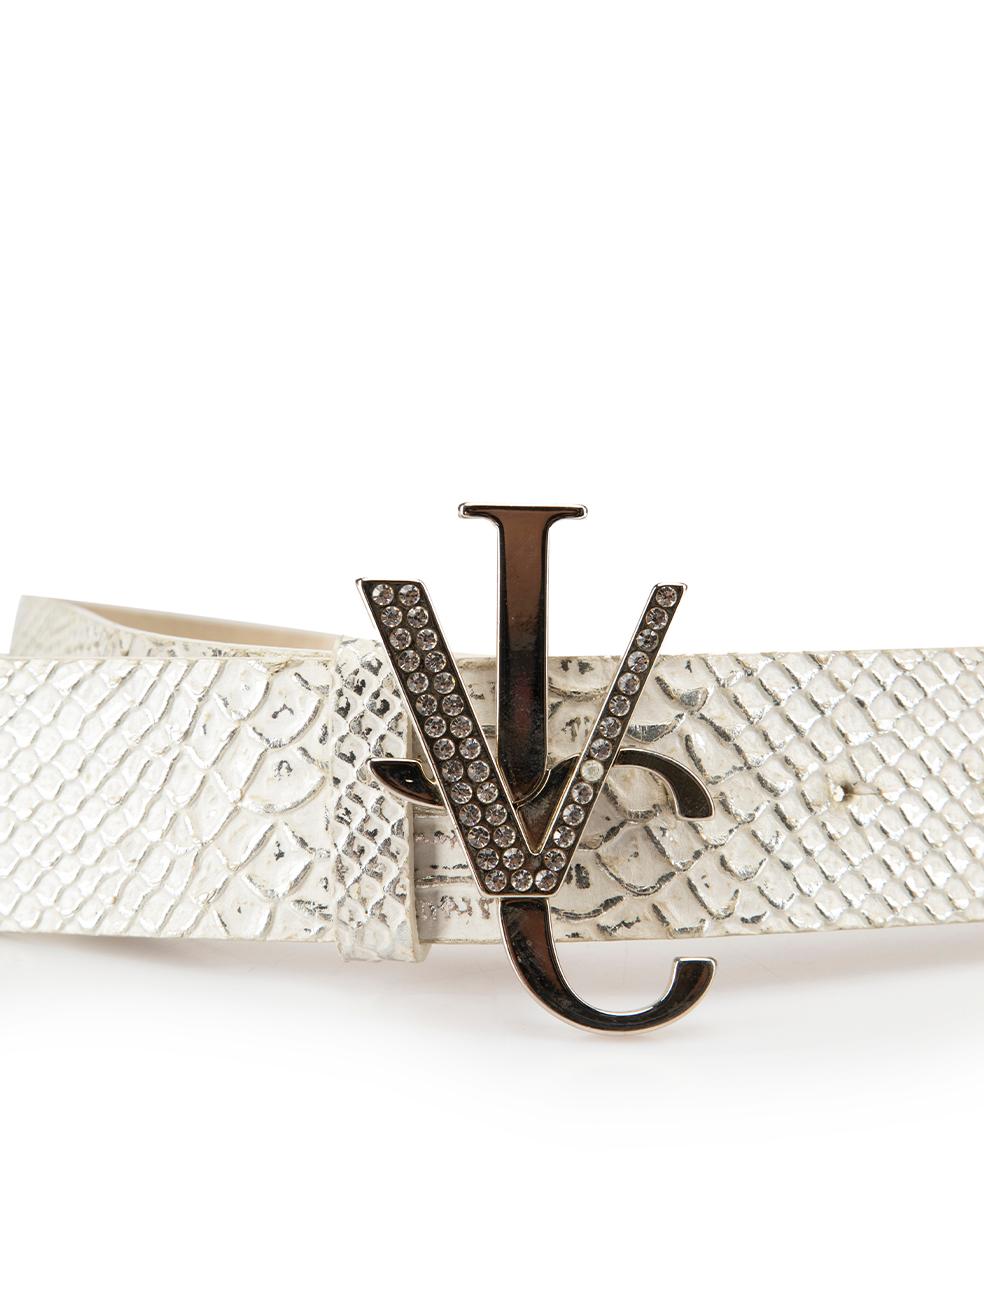 CONDITION is Very good. Hardly any visible wear to belt is evident on this used Versace Jeans Couture designer resale item.



Details


Silver

Python leather

Belt

Embellished logo buckle detail



 

Made in Italy 

 

Composition

EXTERIOR: